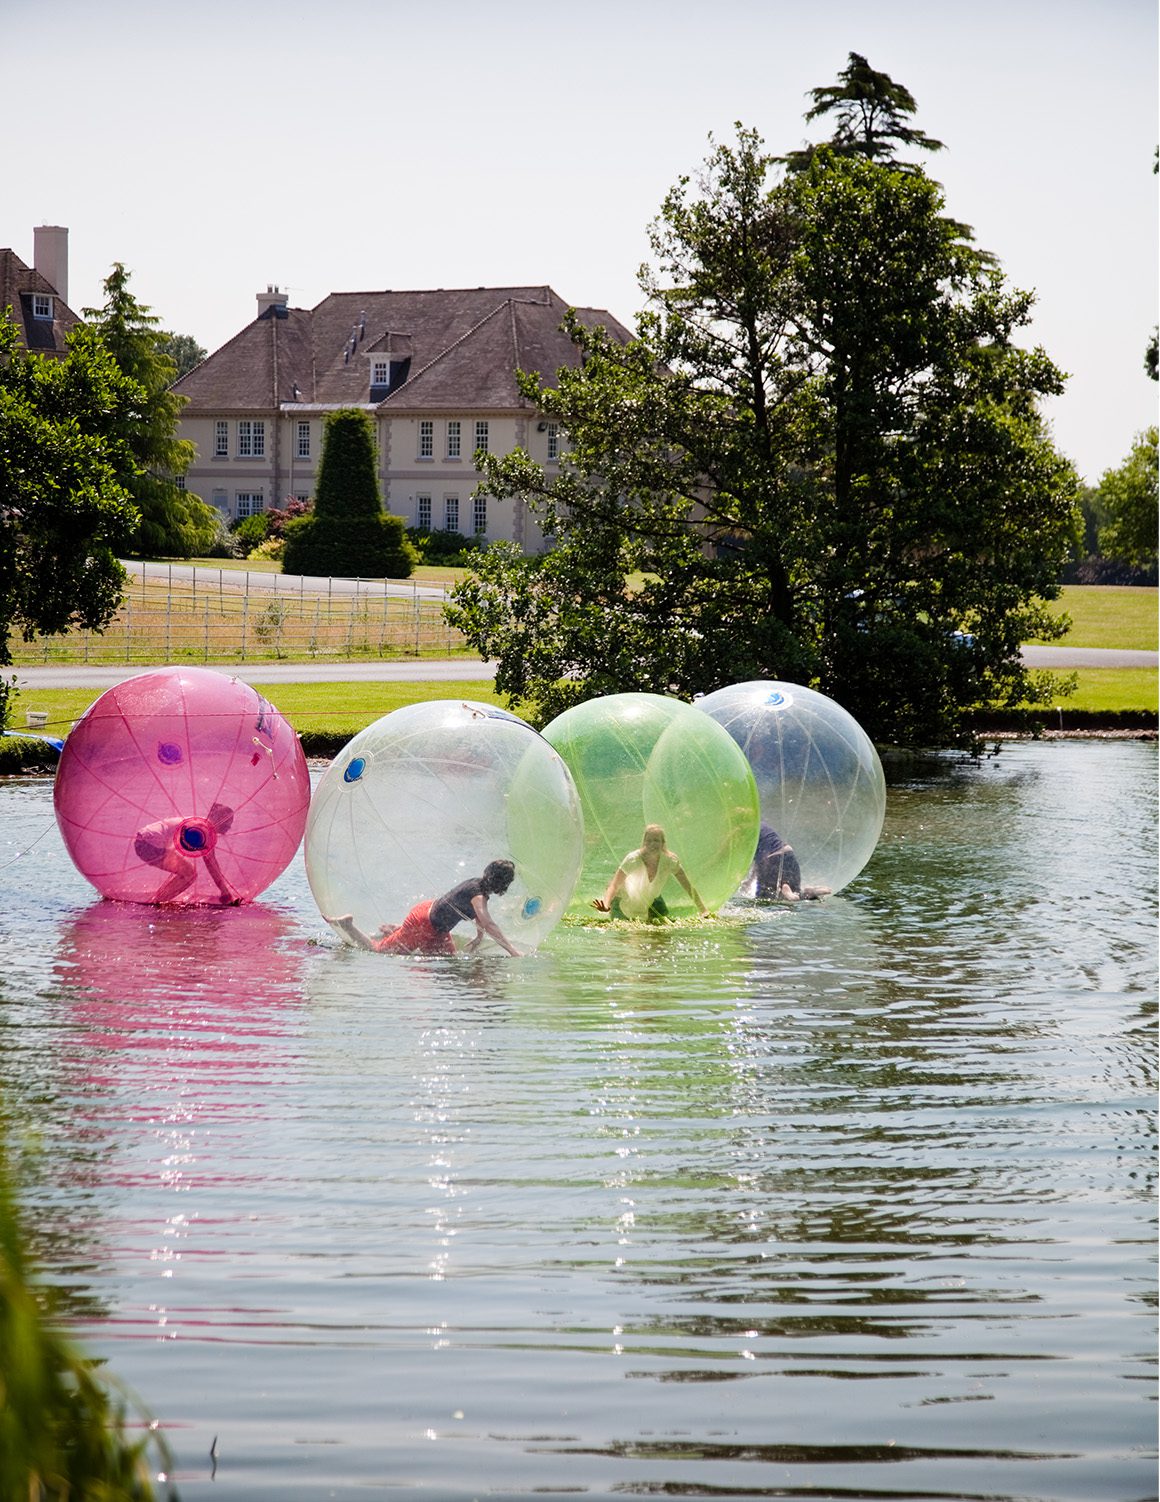 Group of people inside inflatable plastic bubbles on the lake outside of Brockencote Hall